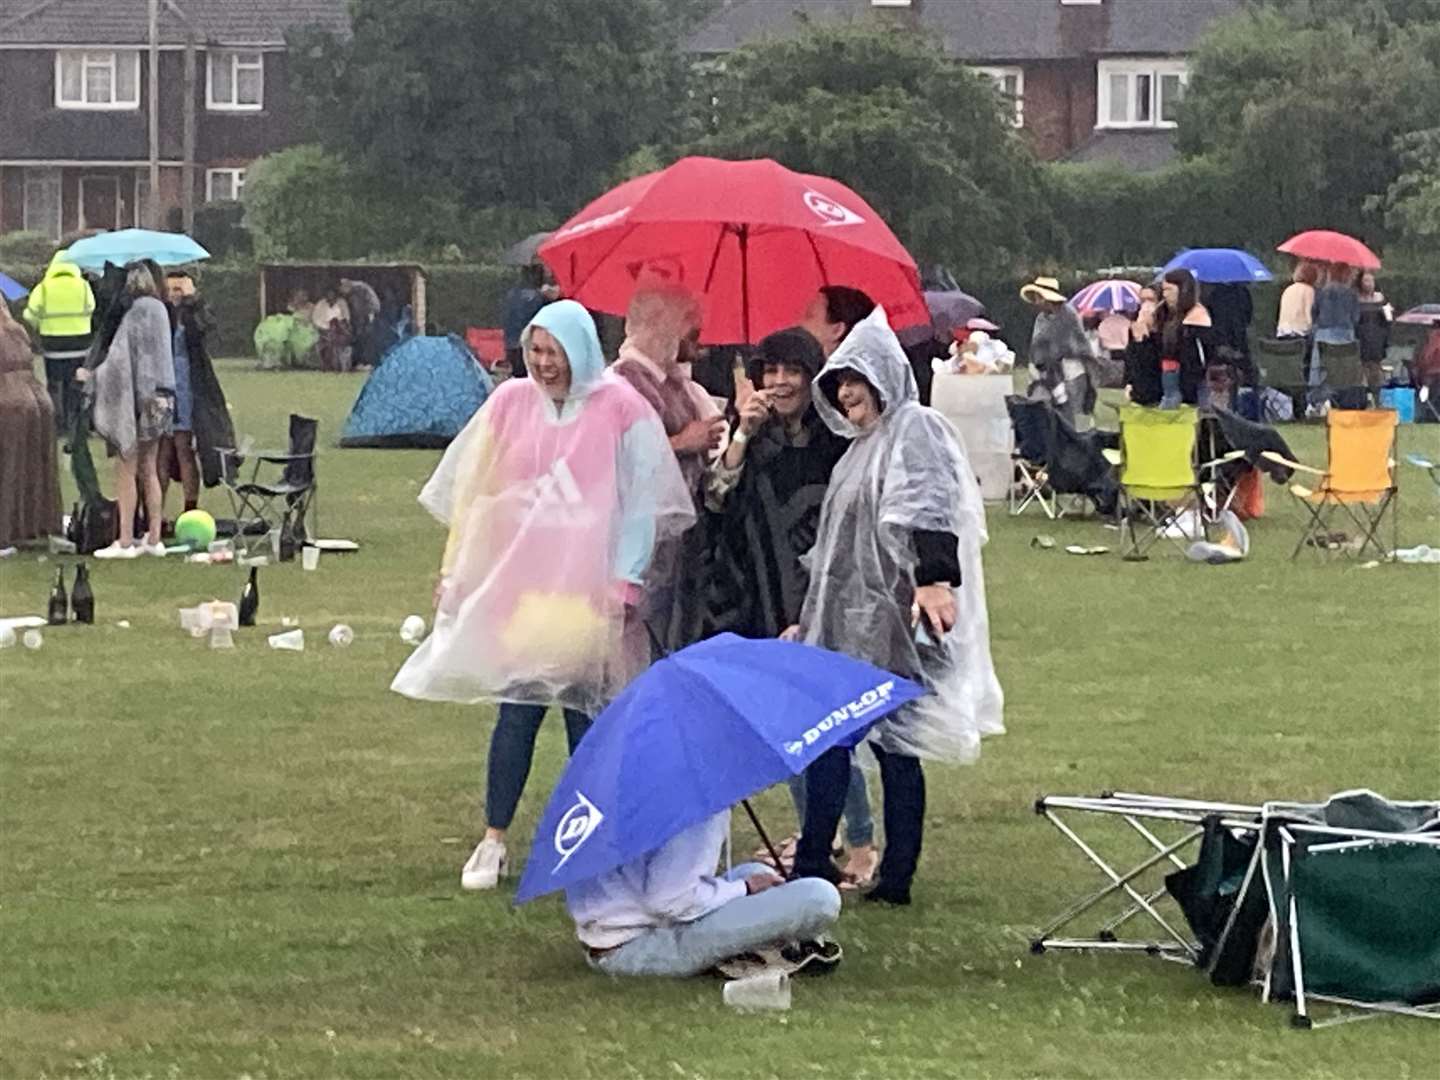 Rain almost stopped play at Sittingbourne's Party in the Park